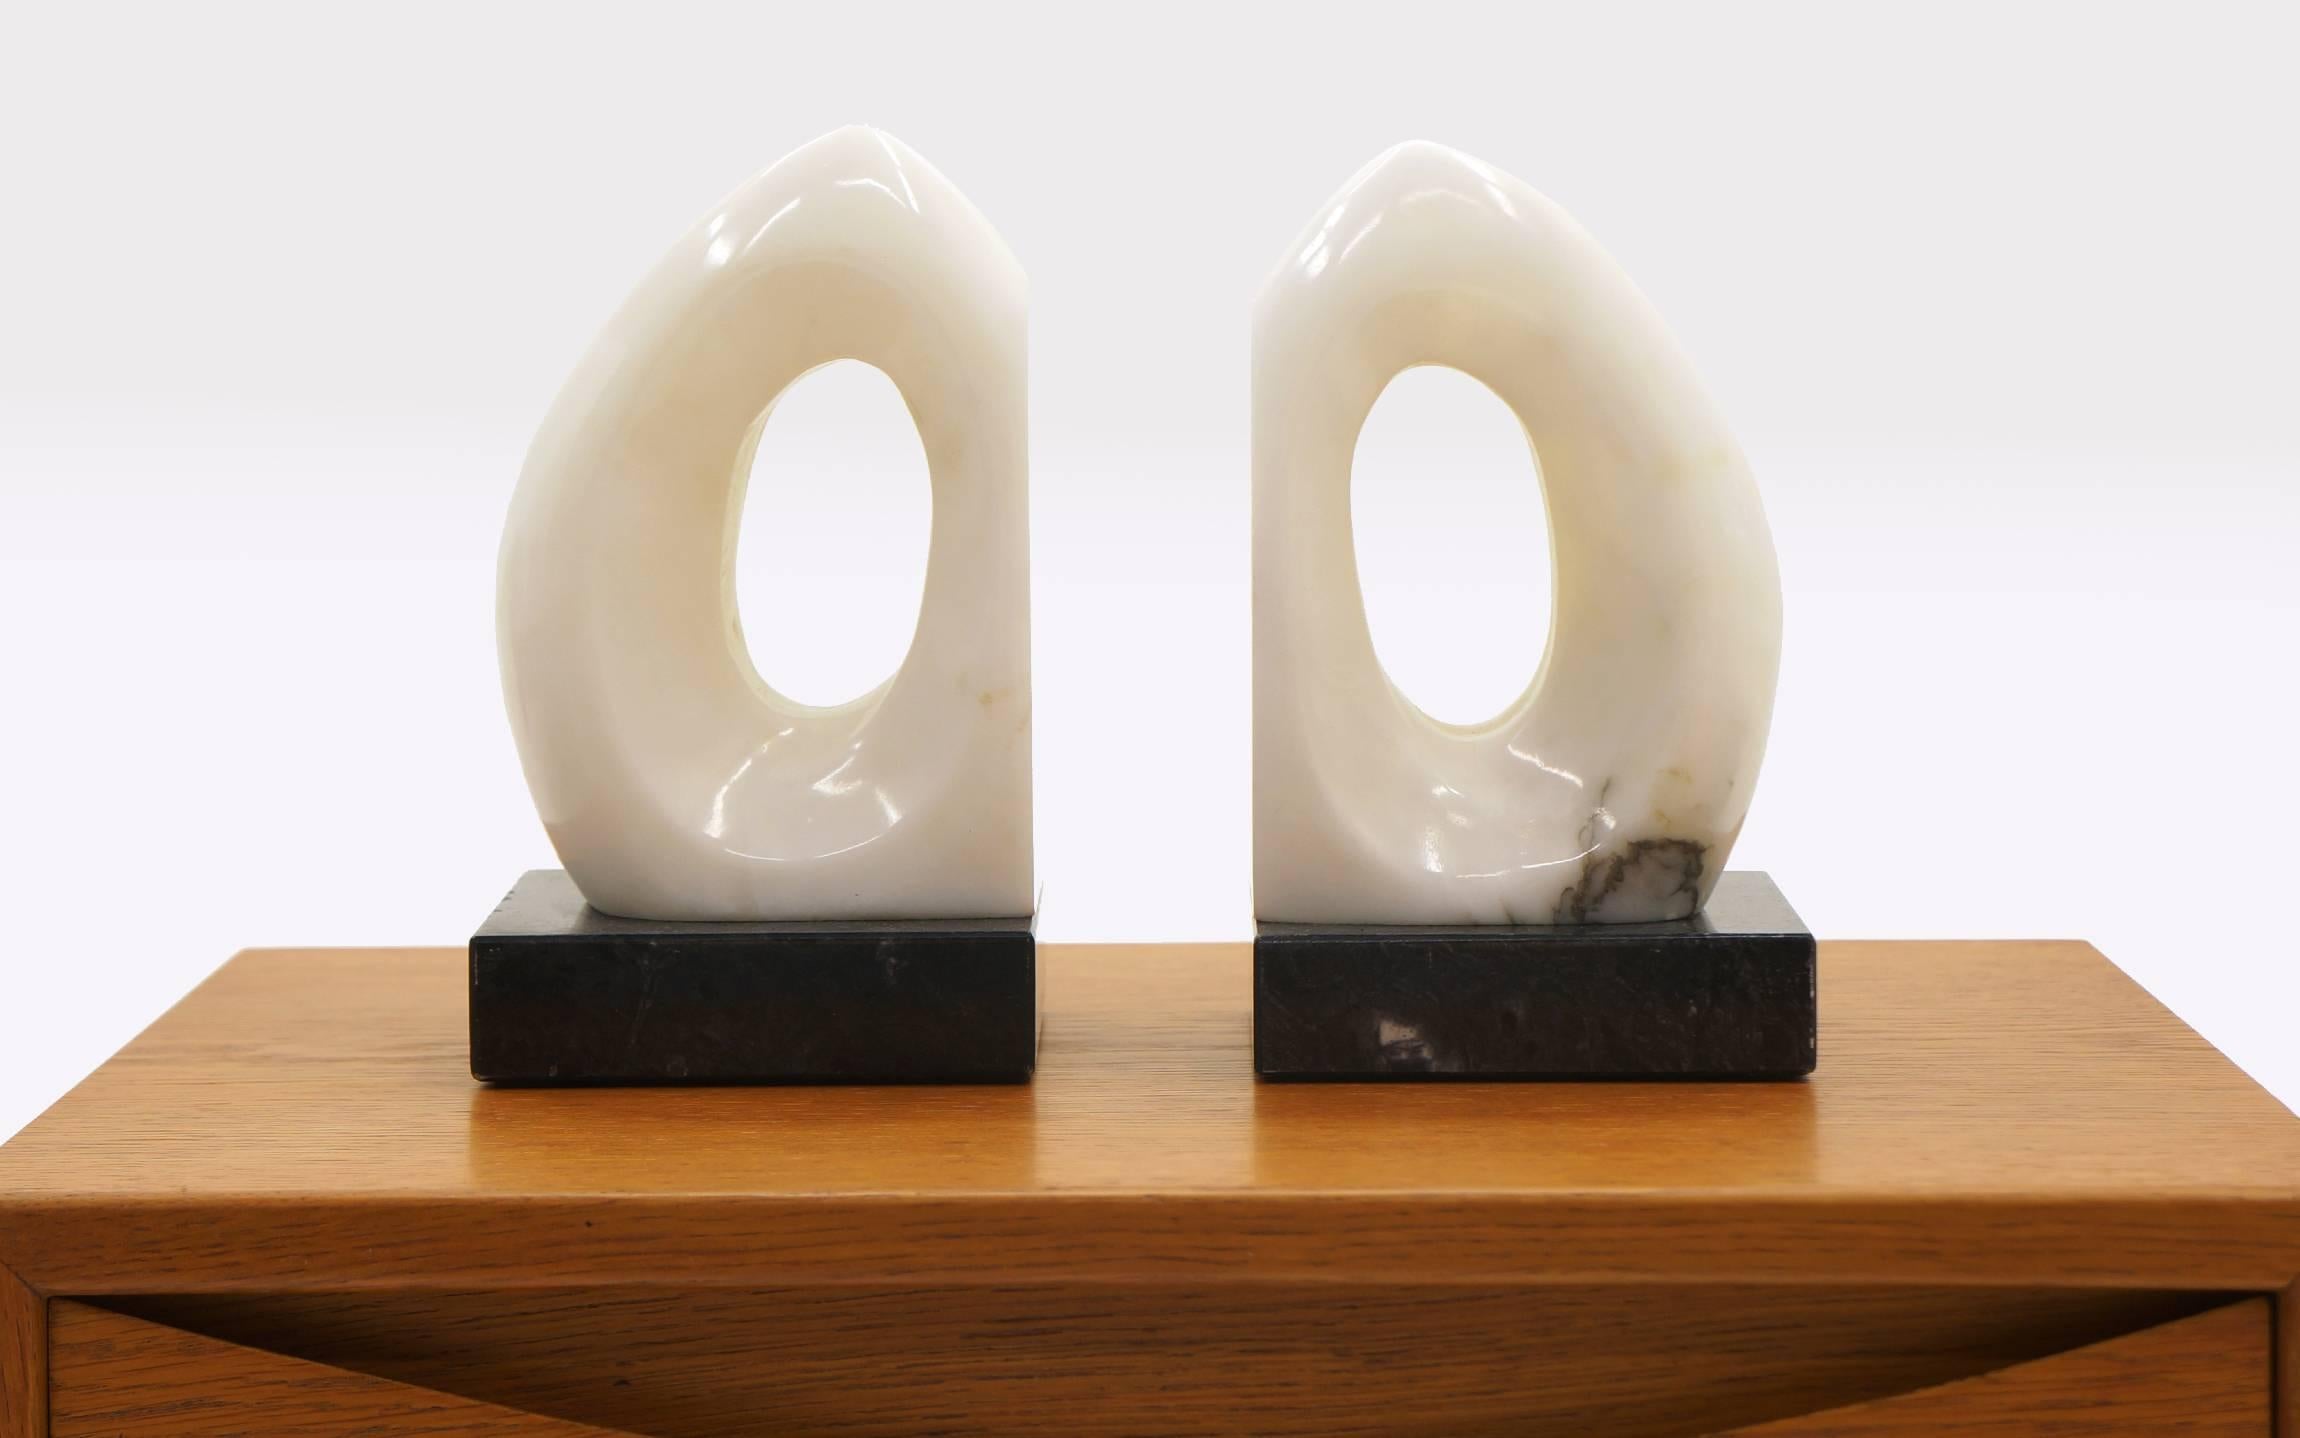 Pair of bookends, sculptural, organic alabaster forms on black marble bases. Excellent condition. Numbered and signed 